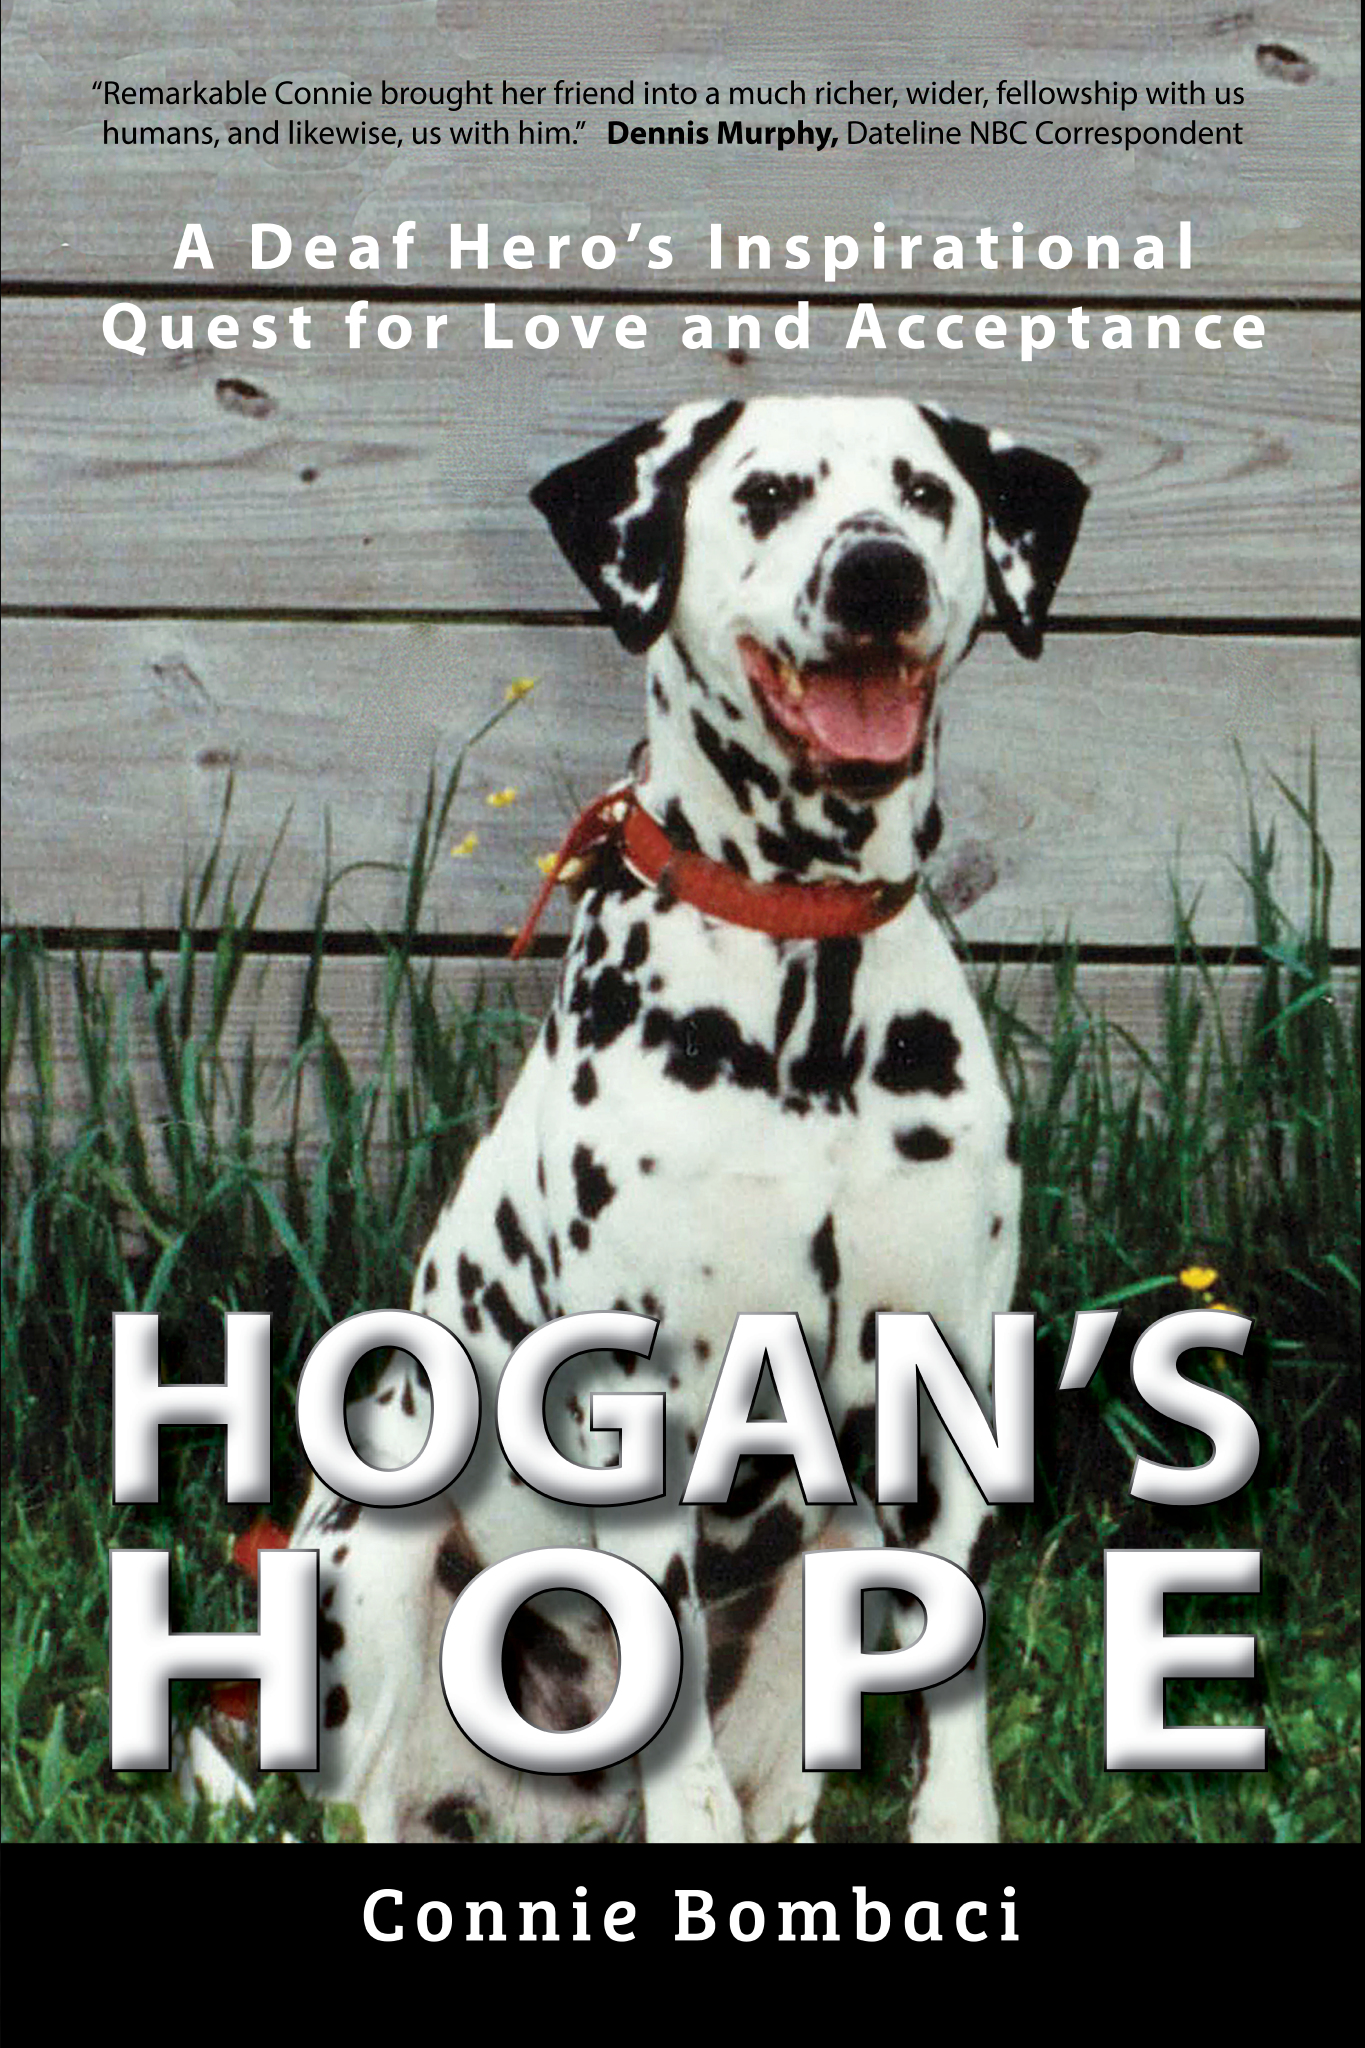 FREE: Hogan’s Hope: A Deaf Hero’s Inspirational Quest for Love and Acceptance by Connie Bombaci